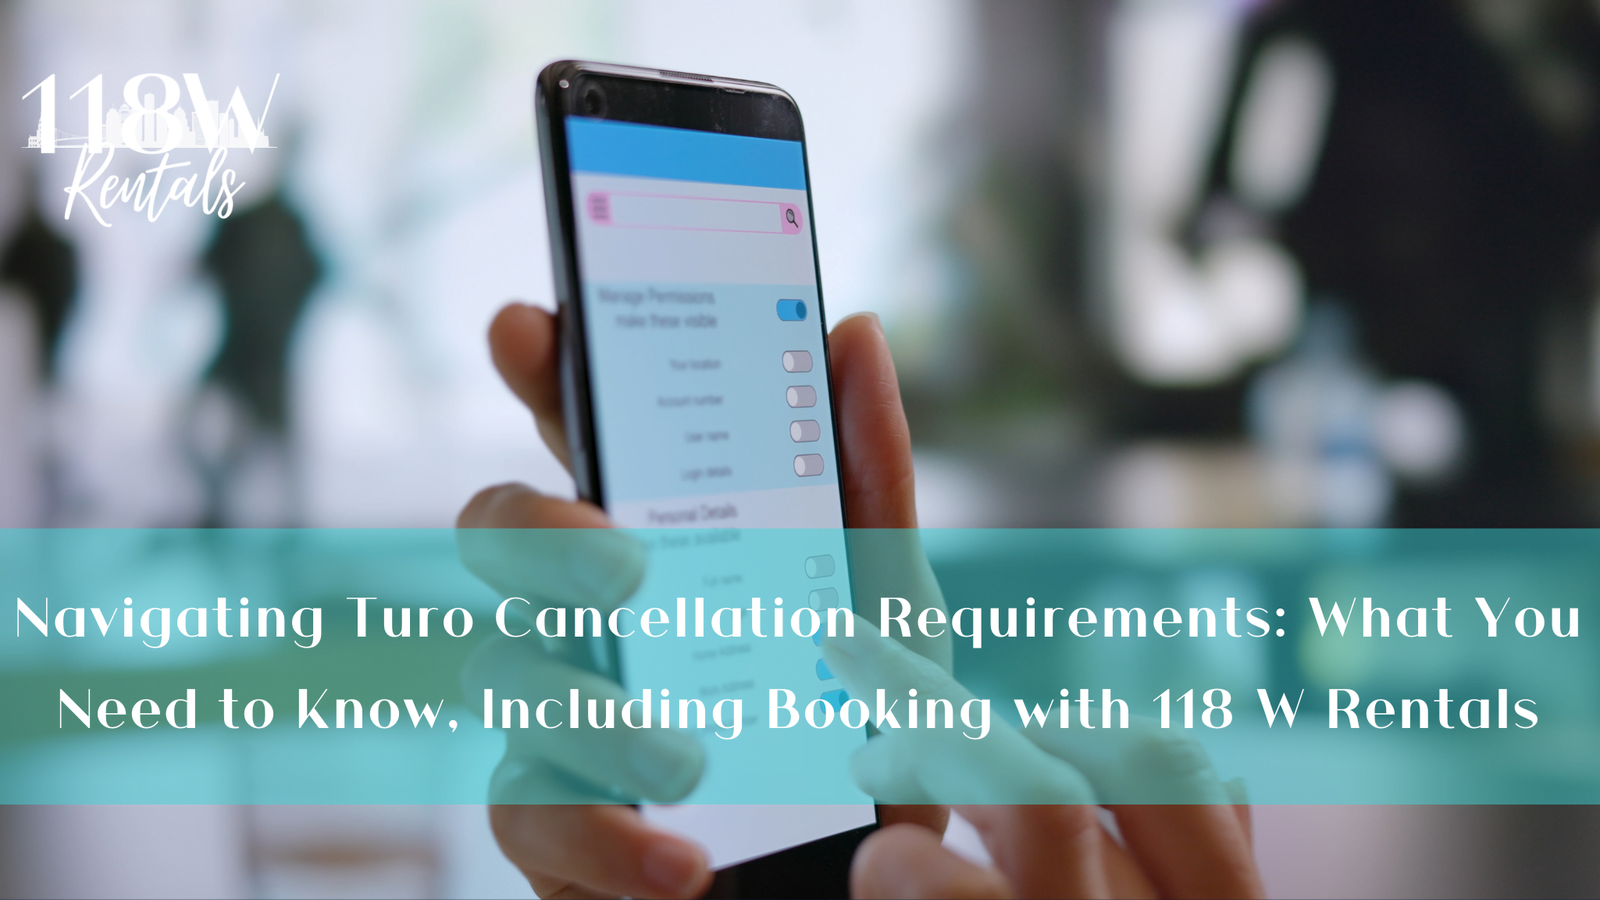 Navigating Turo Cancellation Requirements: What You Need to Know, Including Booking with 118 W Rentals